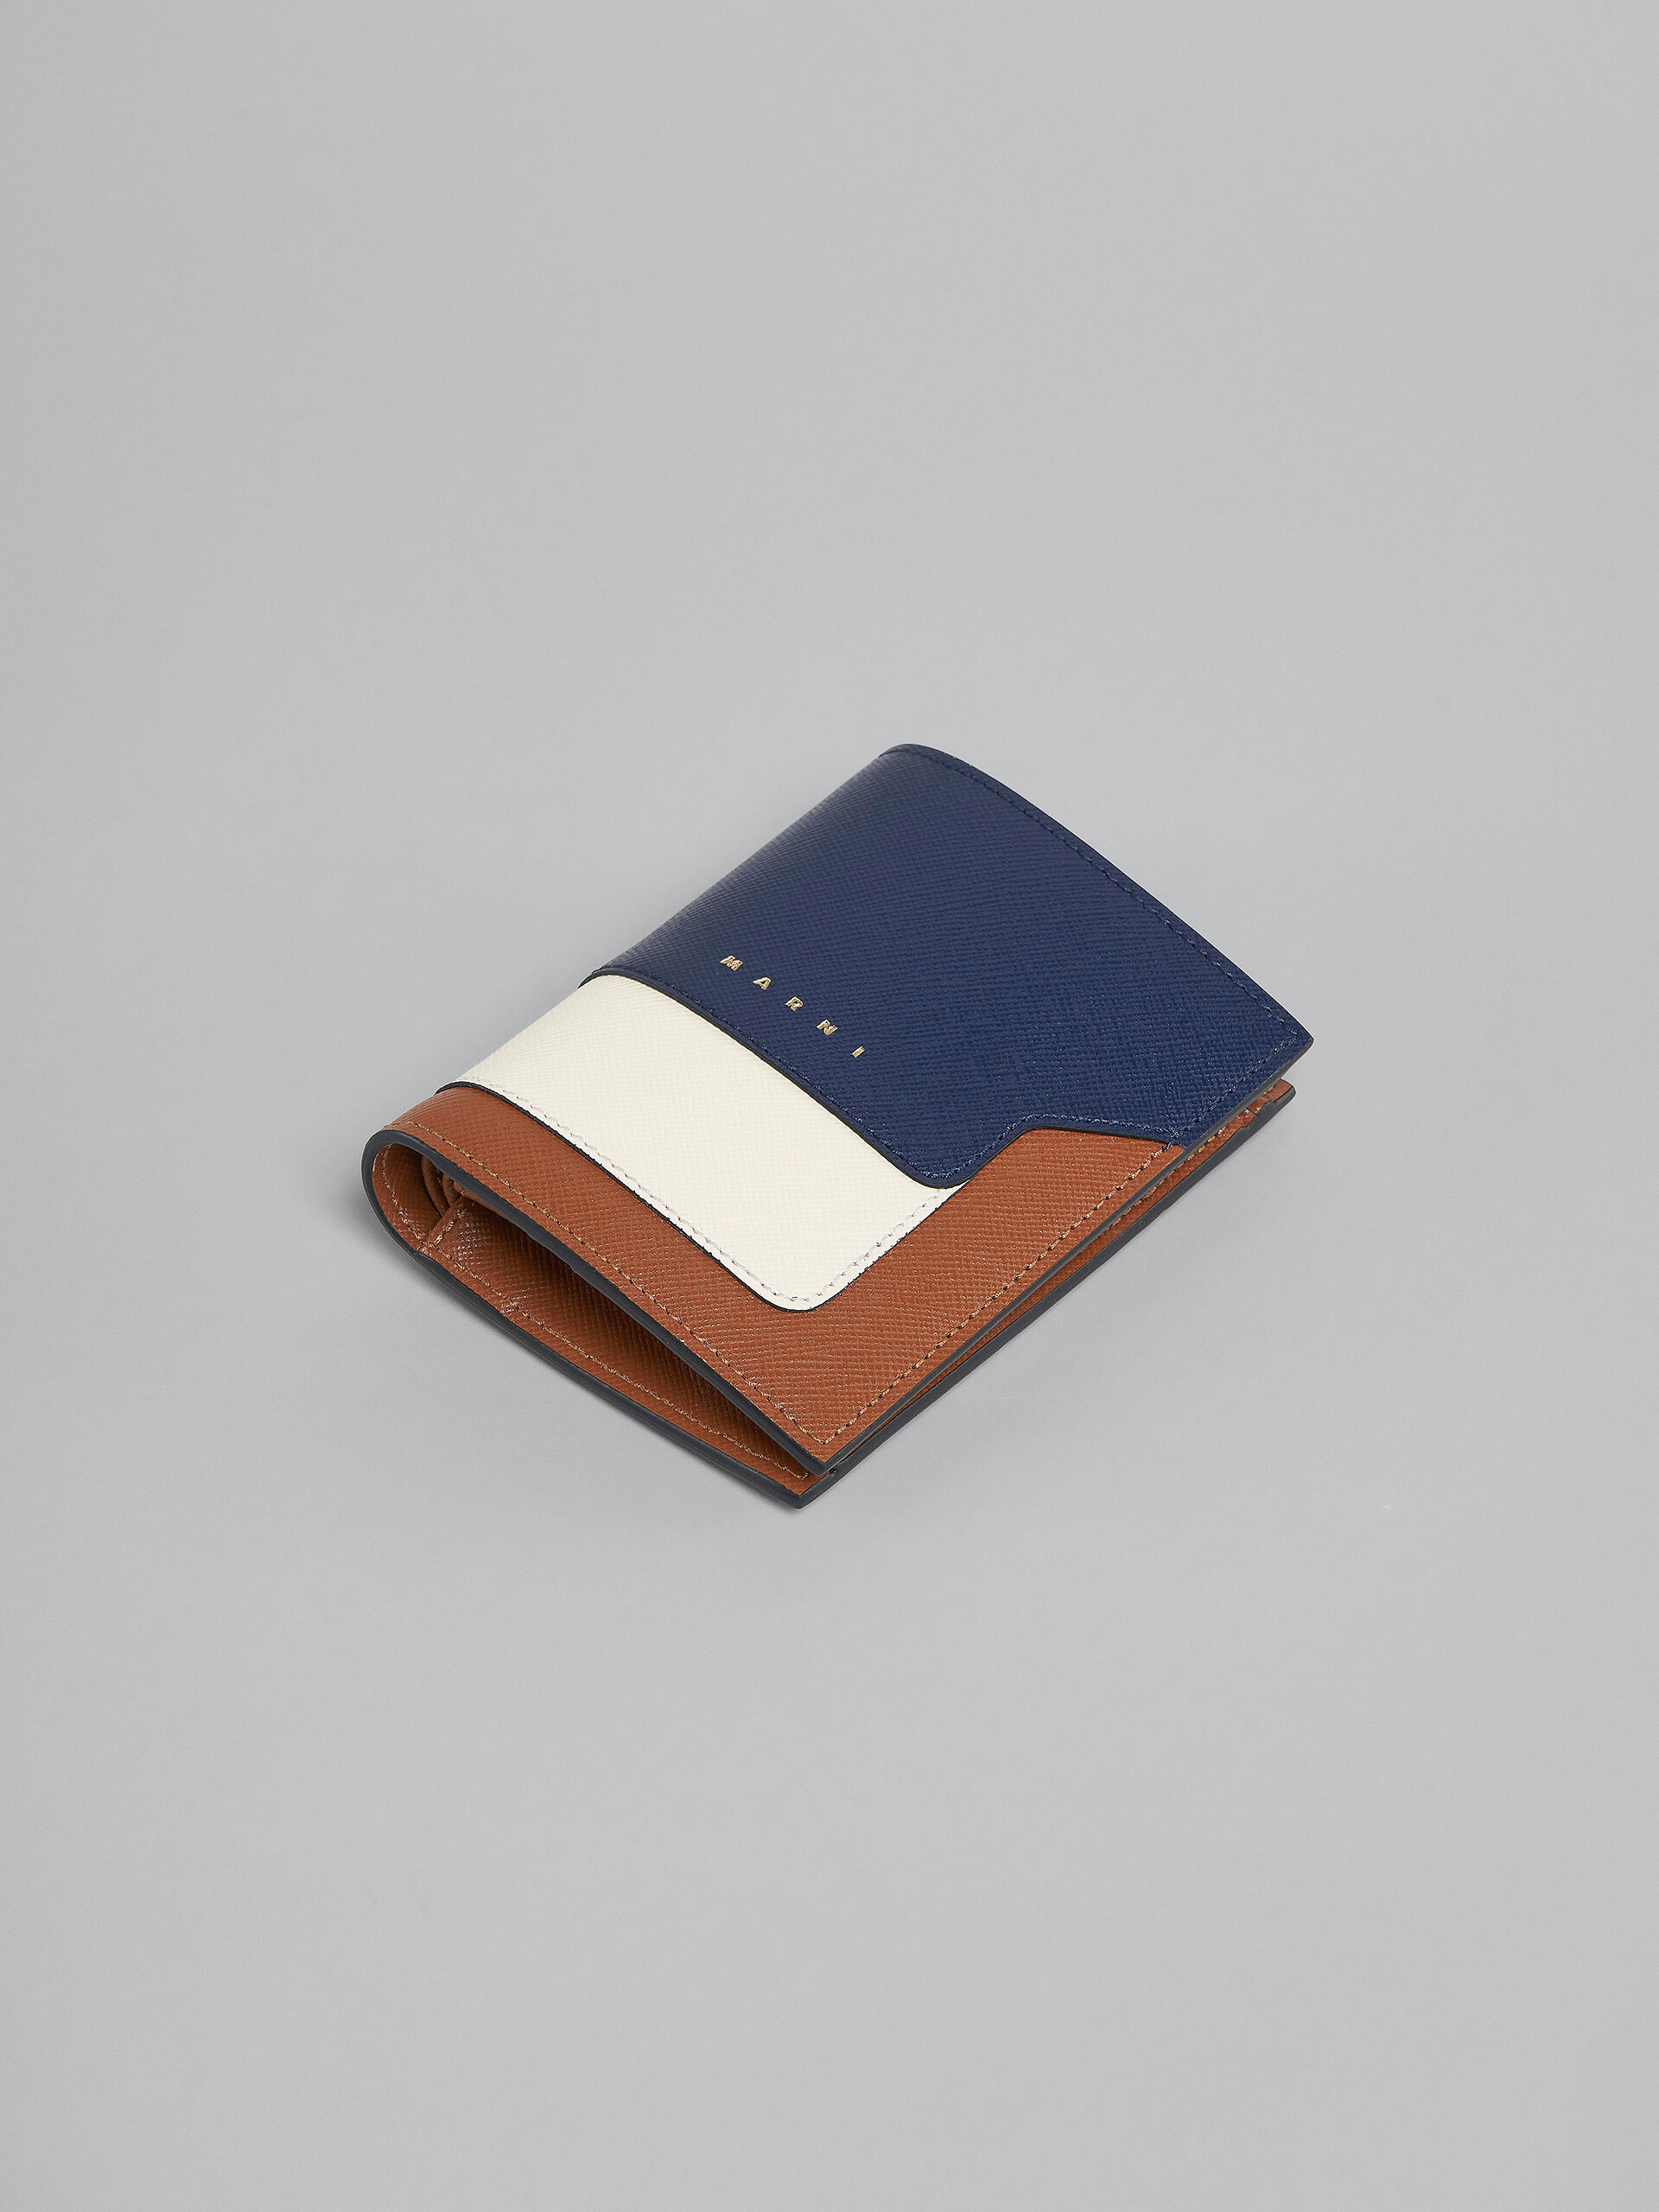 Blue white and brown saffiano leather bi-fold wallet - Wallets - Image 5